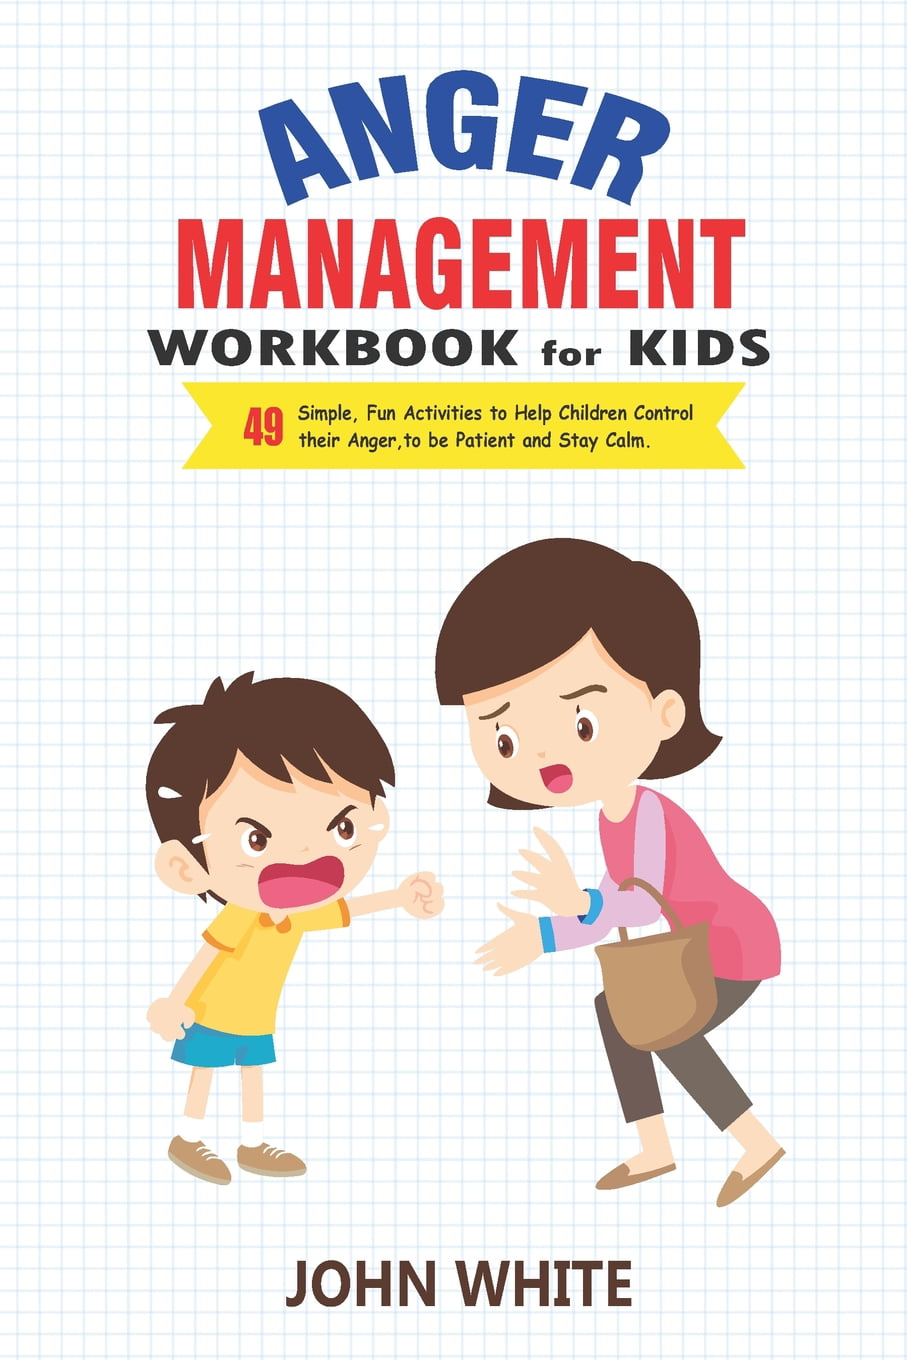 Anger Management Workbook for Kids 49 Simple, fun